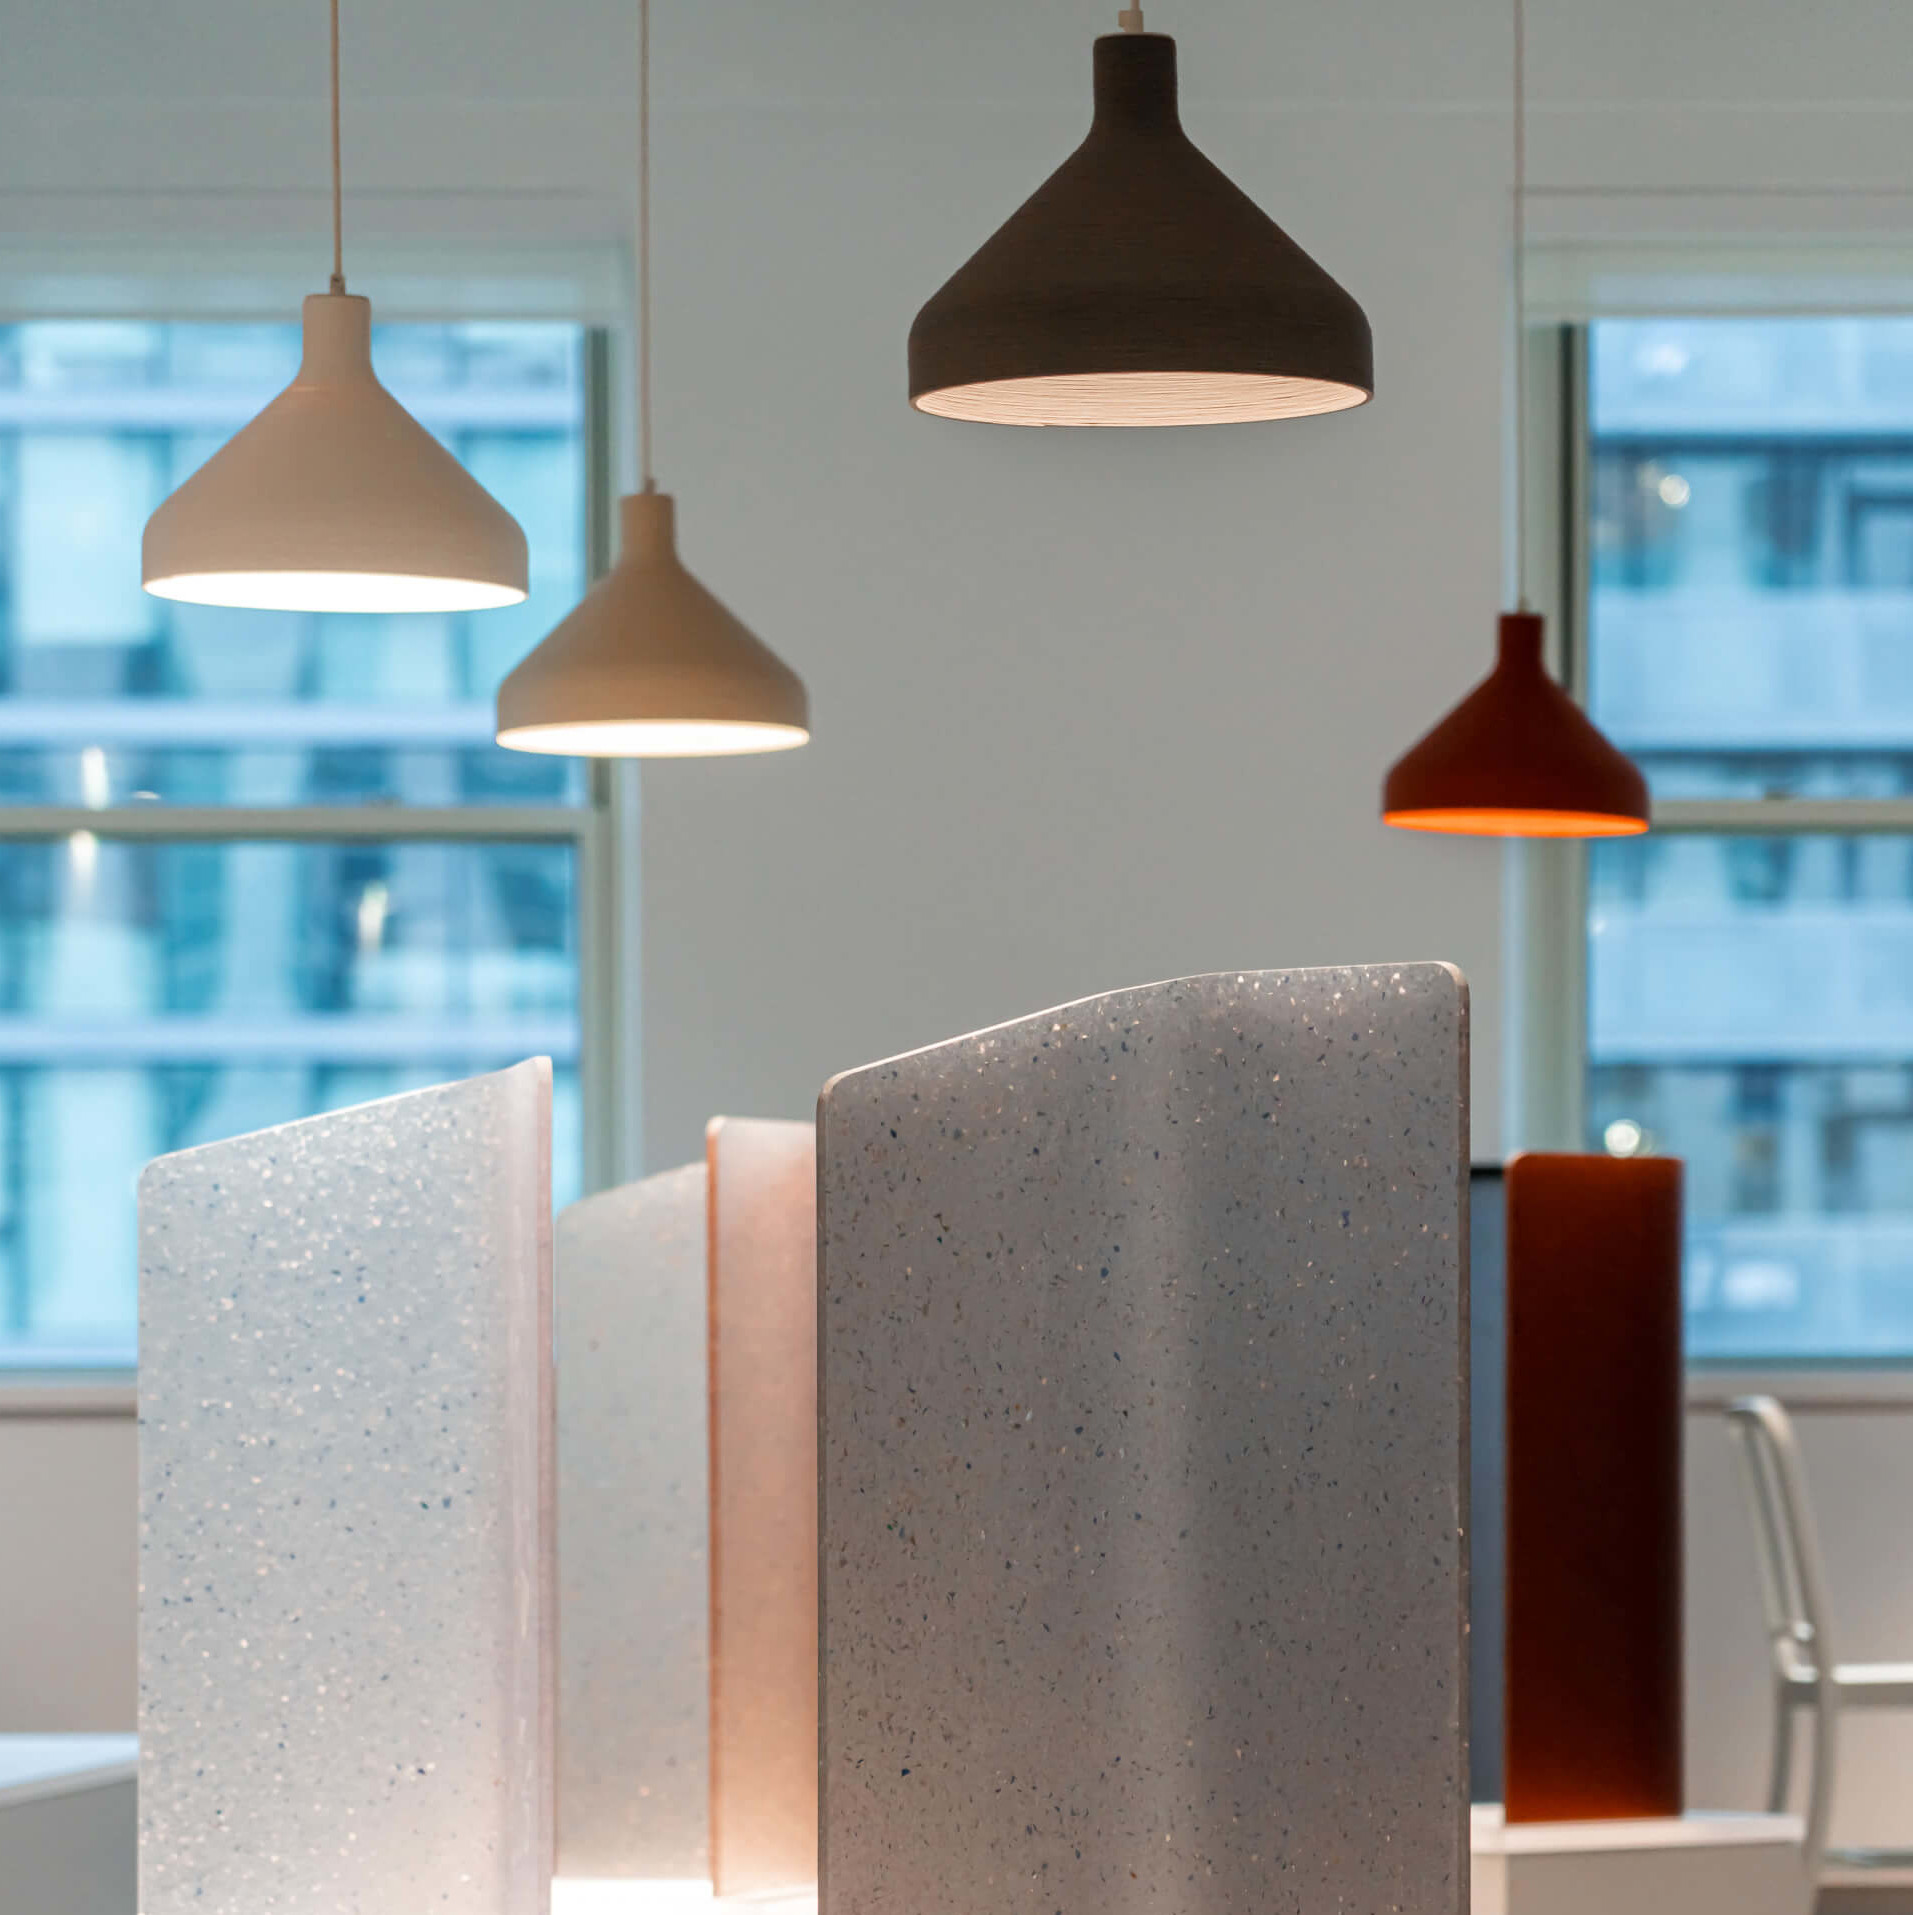 lamps and material samples within in a interior shown at neocon